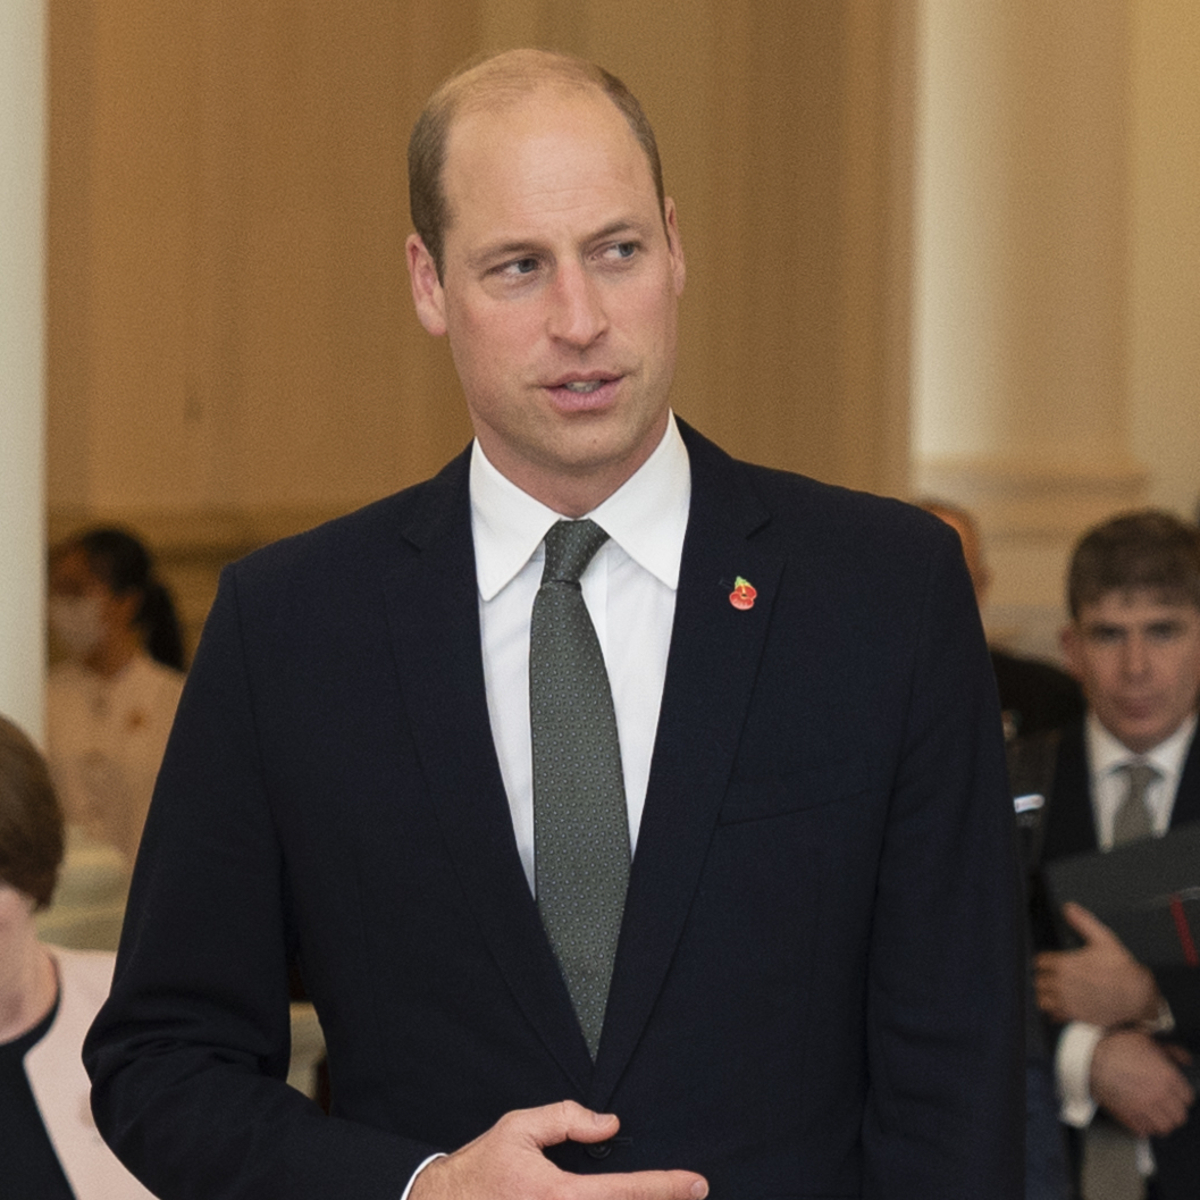 How Prince William Is Prioritizing the Monarchy Over Prince Harry